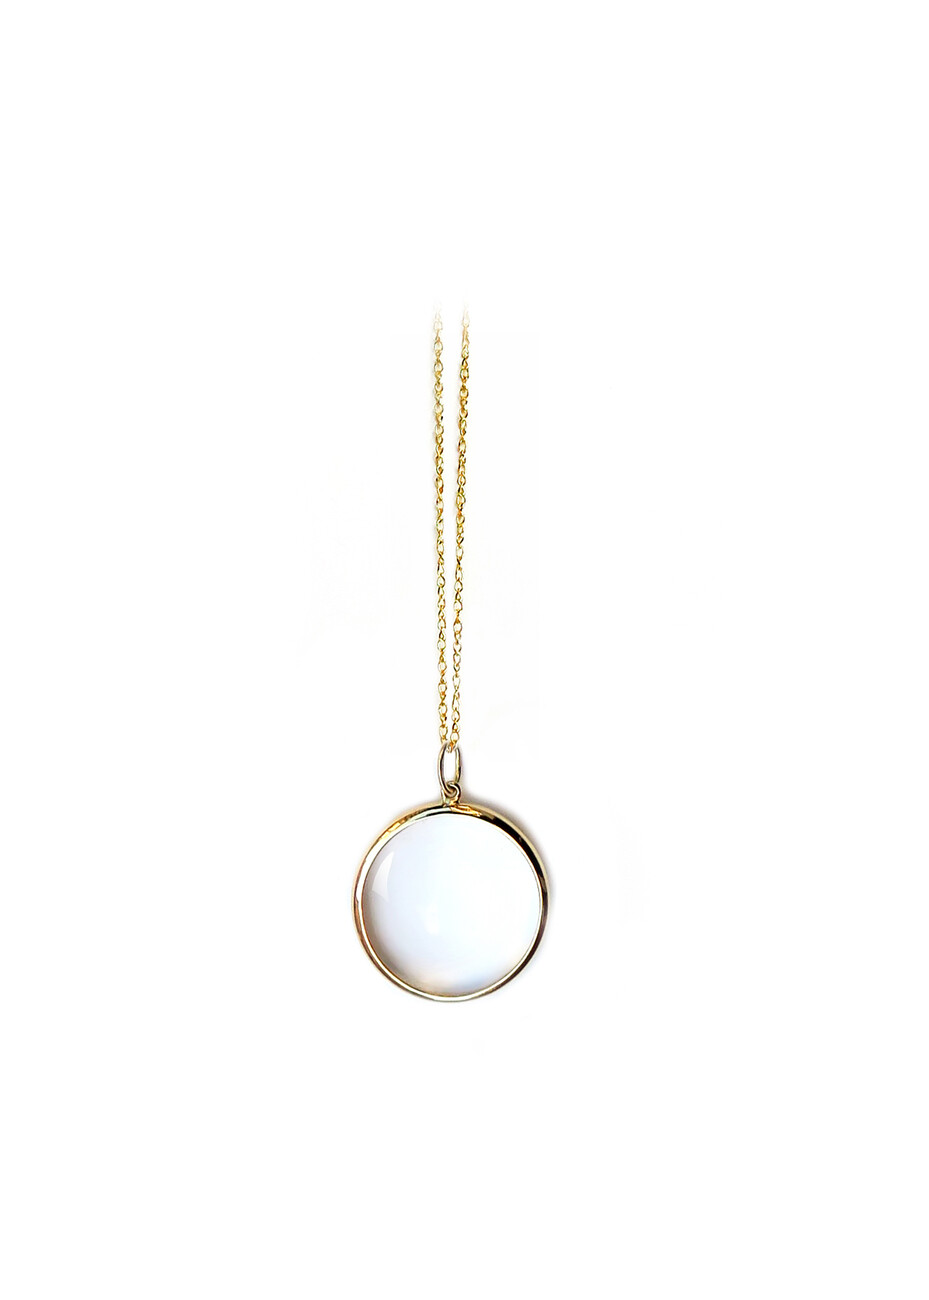 Magnifying glass long necklace in 18kt solid gold